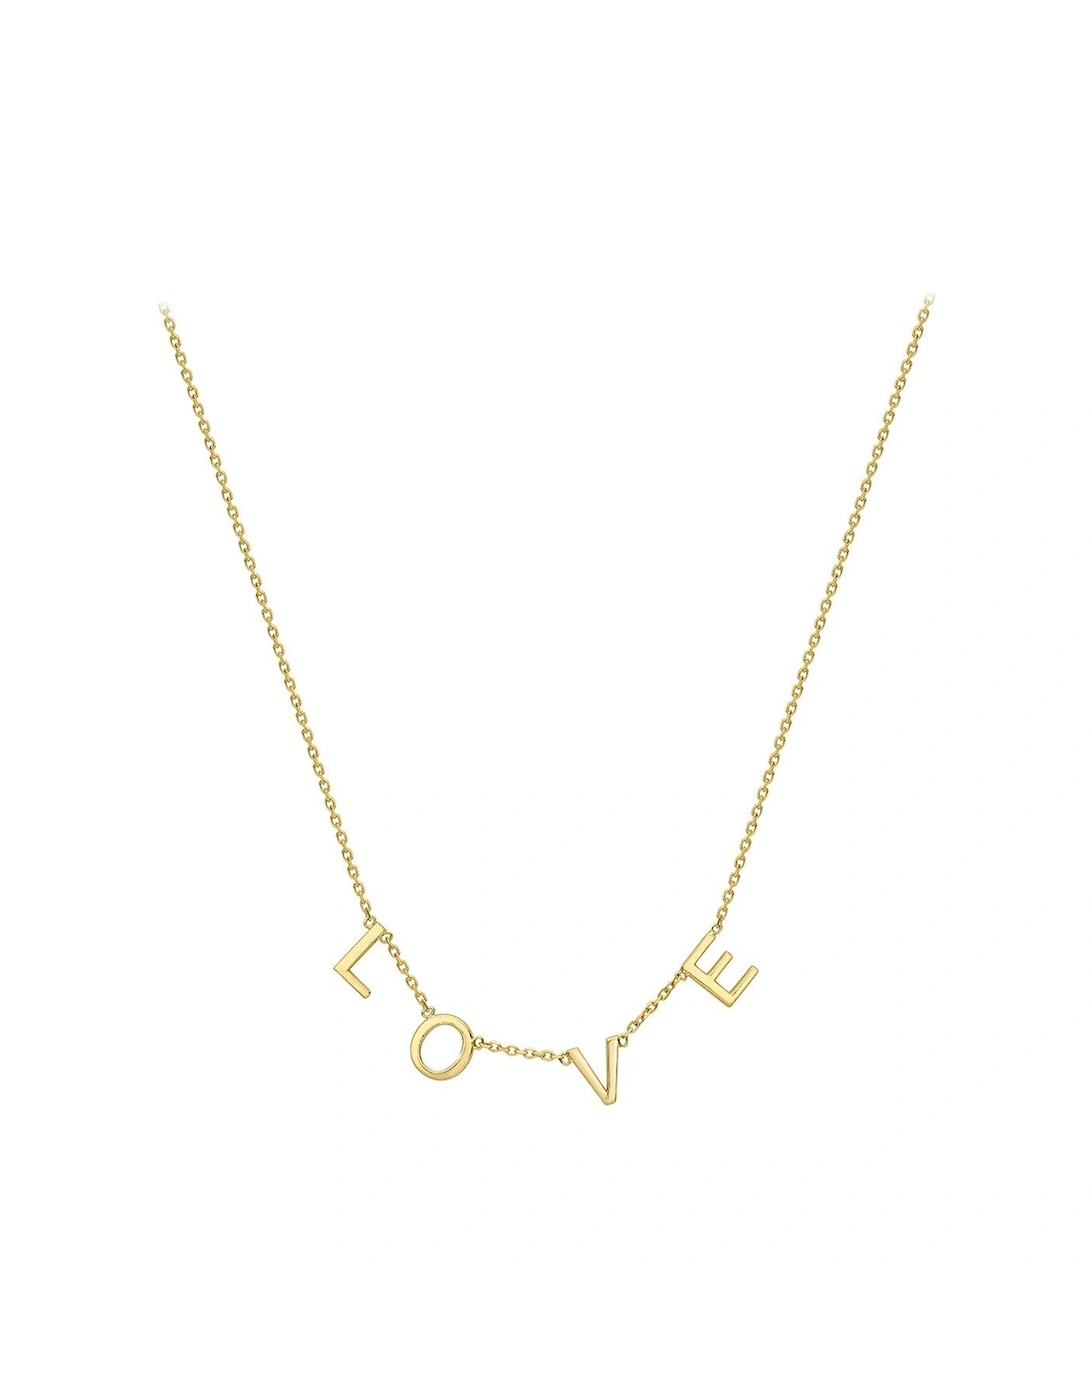 9ct Yellow Gold 5mm 'Love' Adjustable Necklace 38cm/15'-43cm/17', 2 of 1